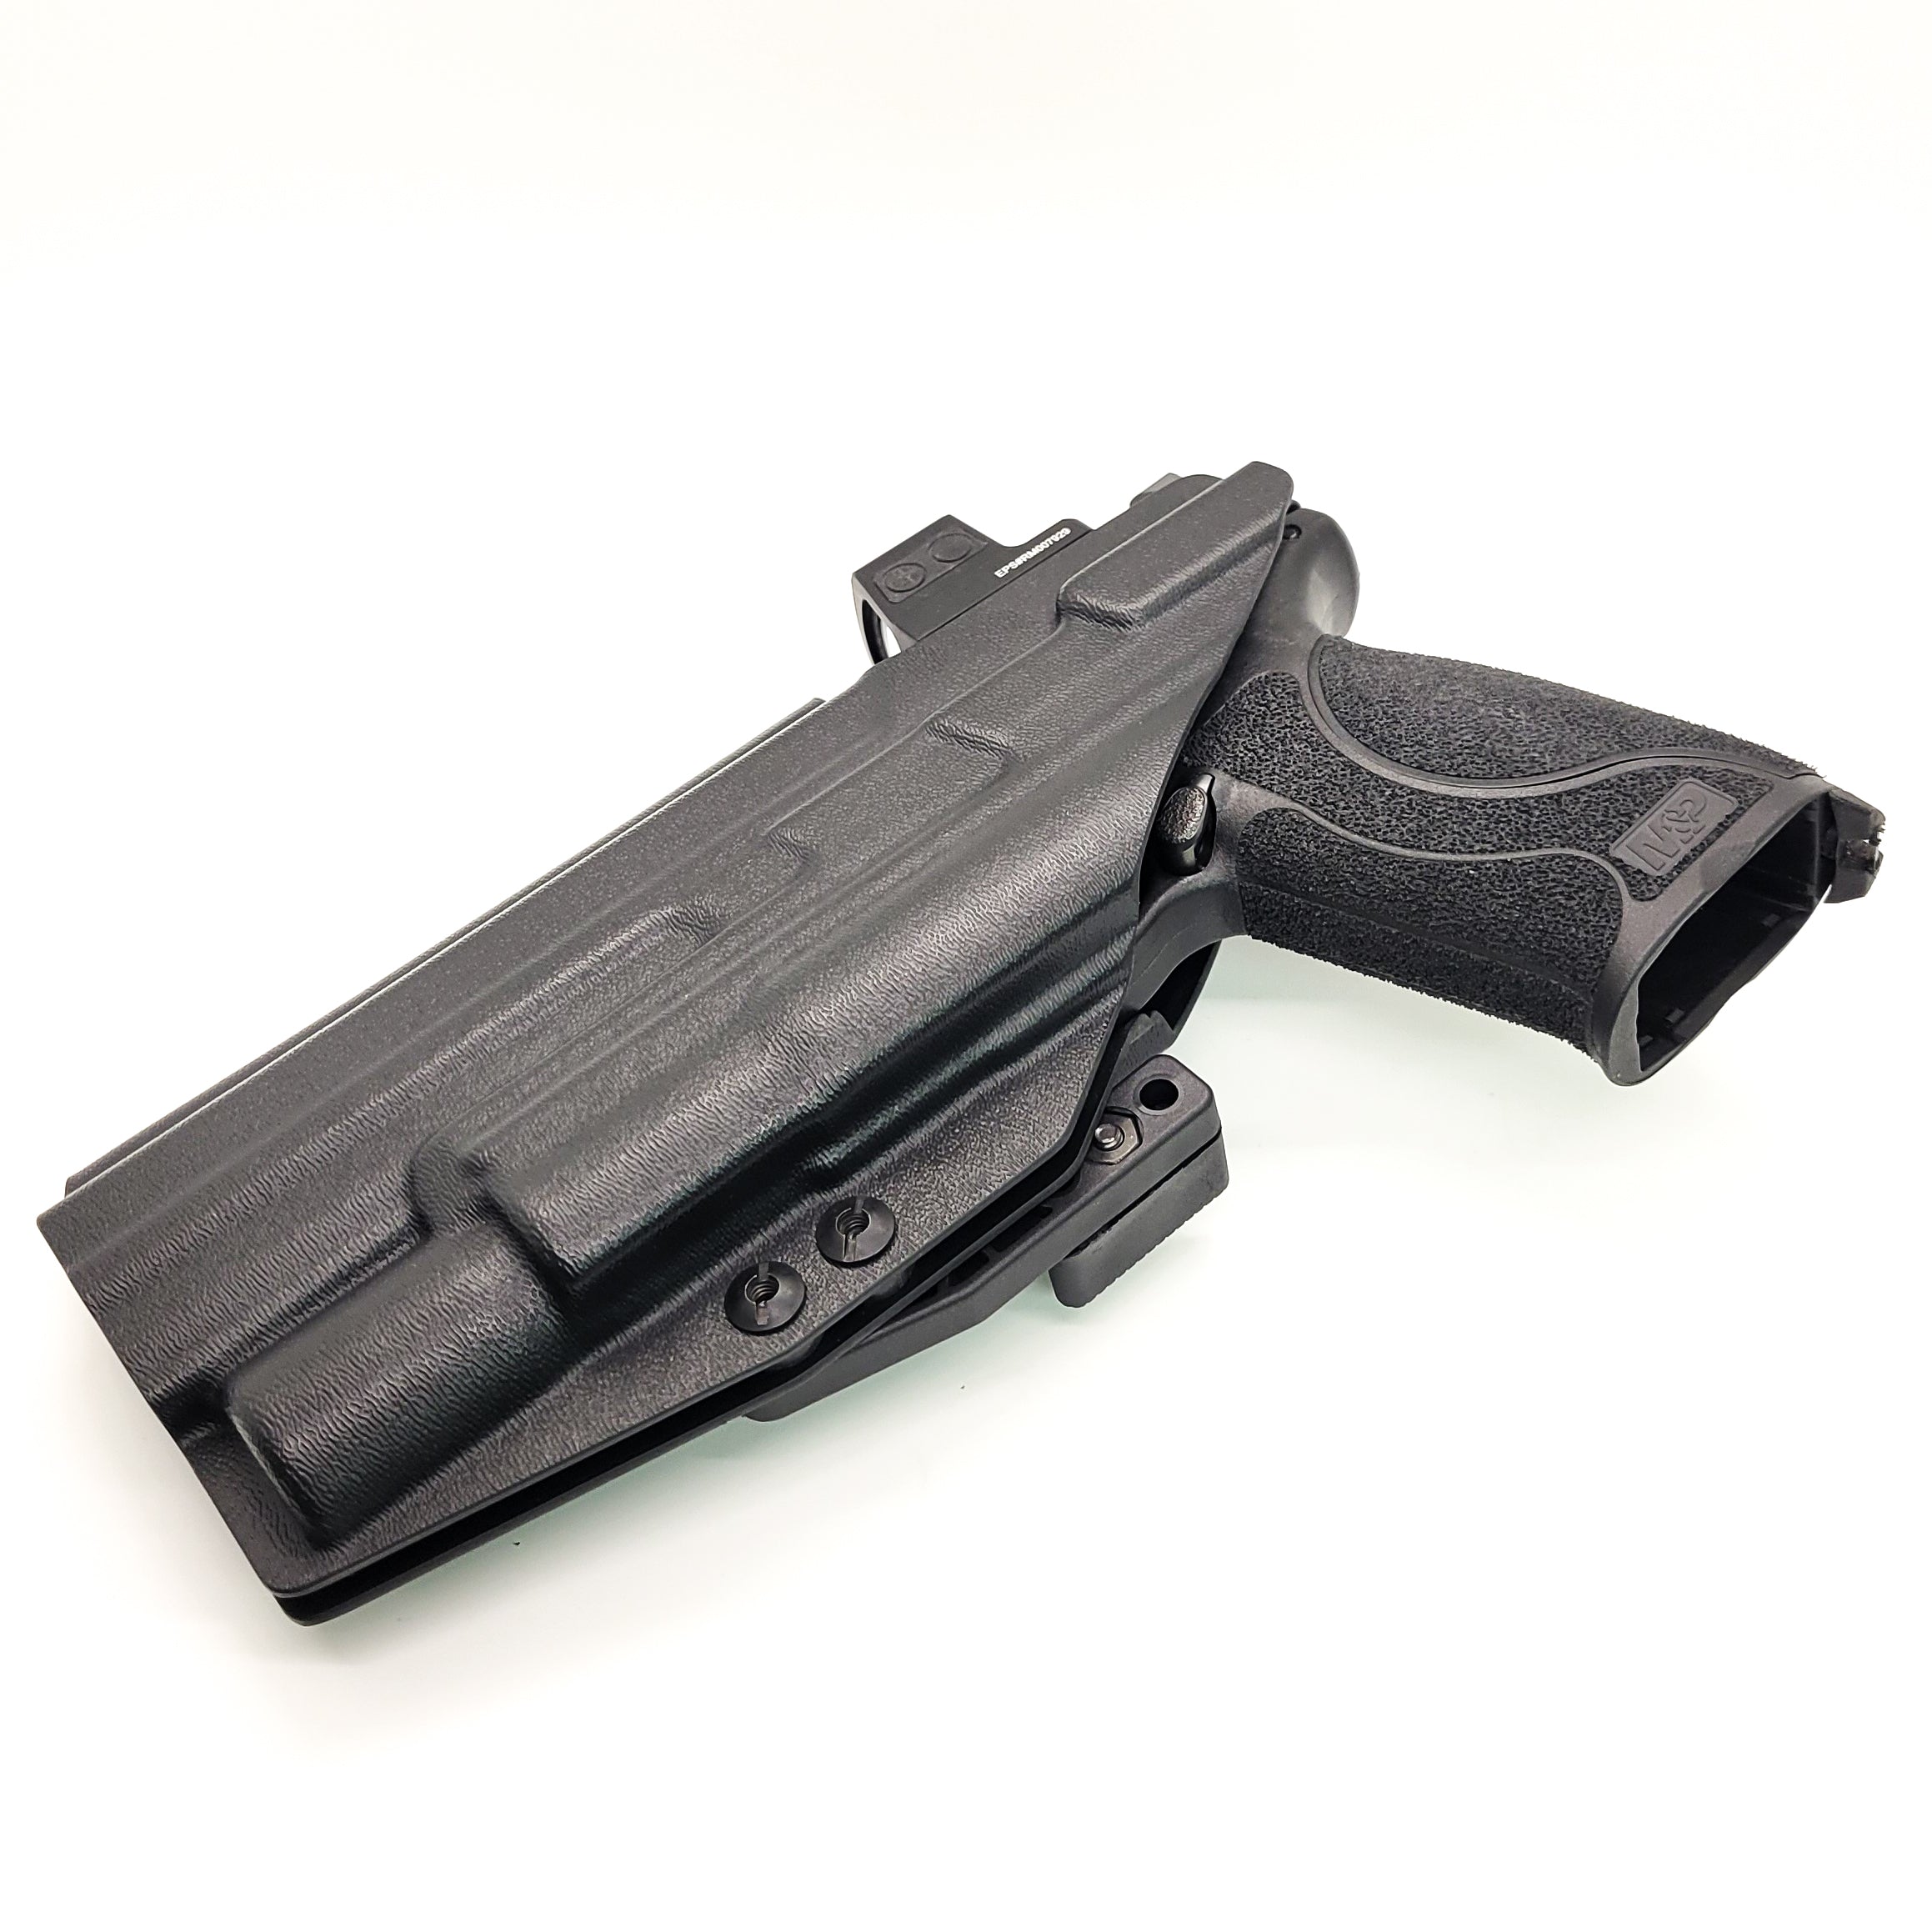 For the best Inside Waistband IWB AIWB Holster designed to fit the Smith and Wesson M&P 10MM 5.6" Performance Center M2.0 pistol with thumb safety & Surefire X300U-A, X300U-B, X-300T-A, or X-300T-B weapon light, shop four brothers. Full sweat guard, adjustable retention, cleared for a red dot sight. Made in the USA.